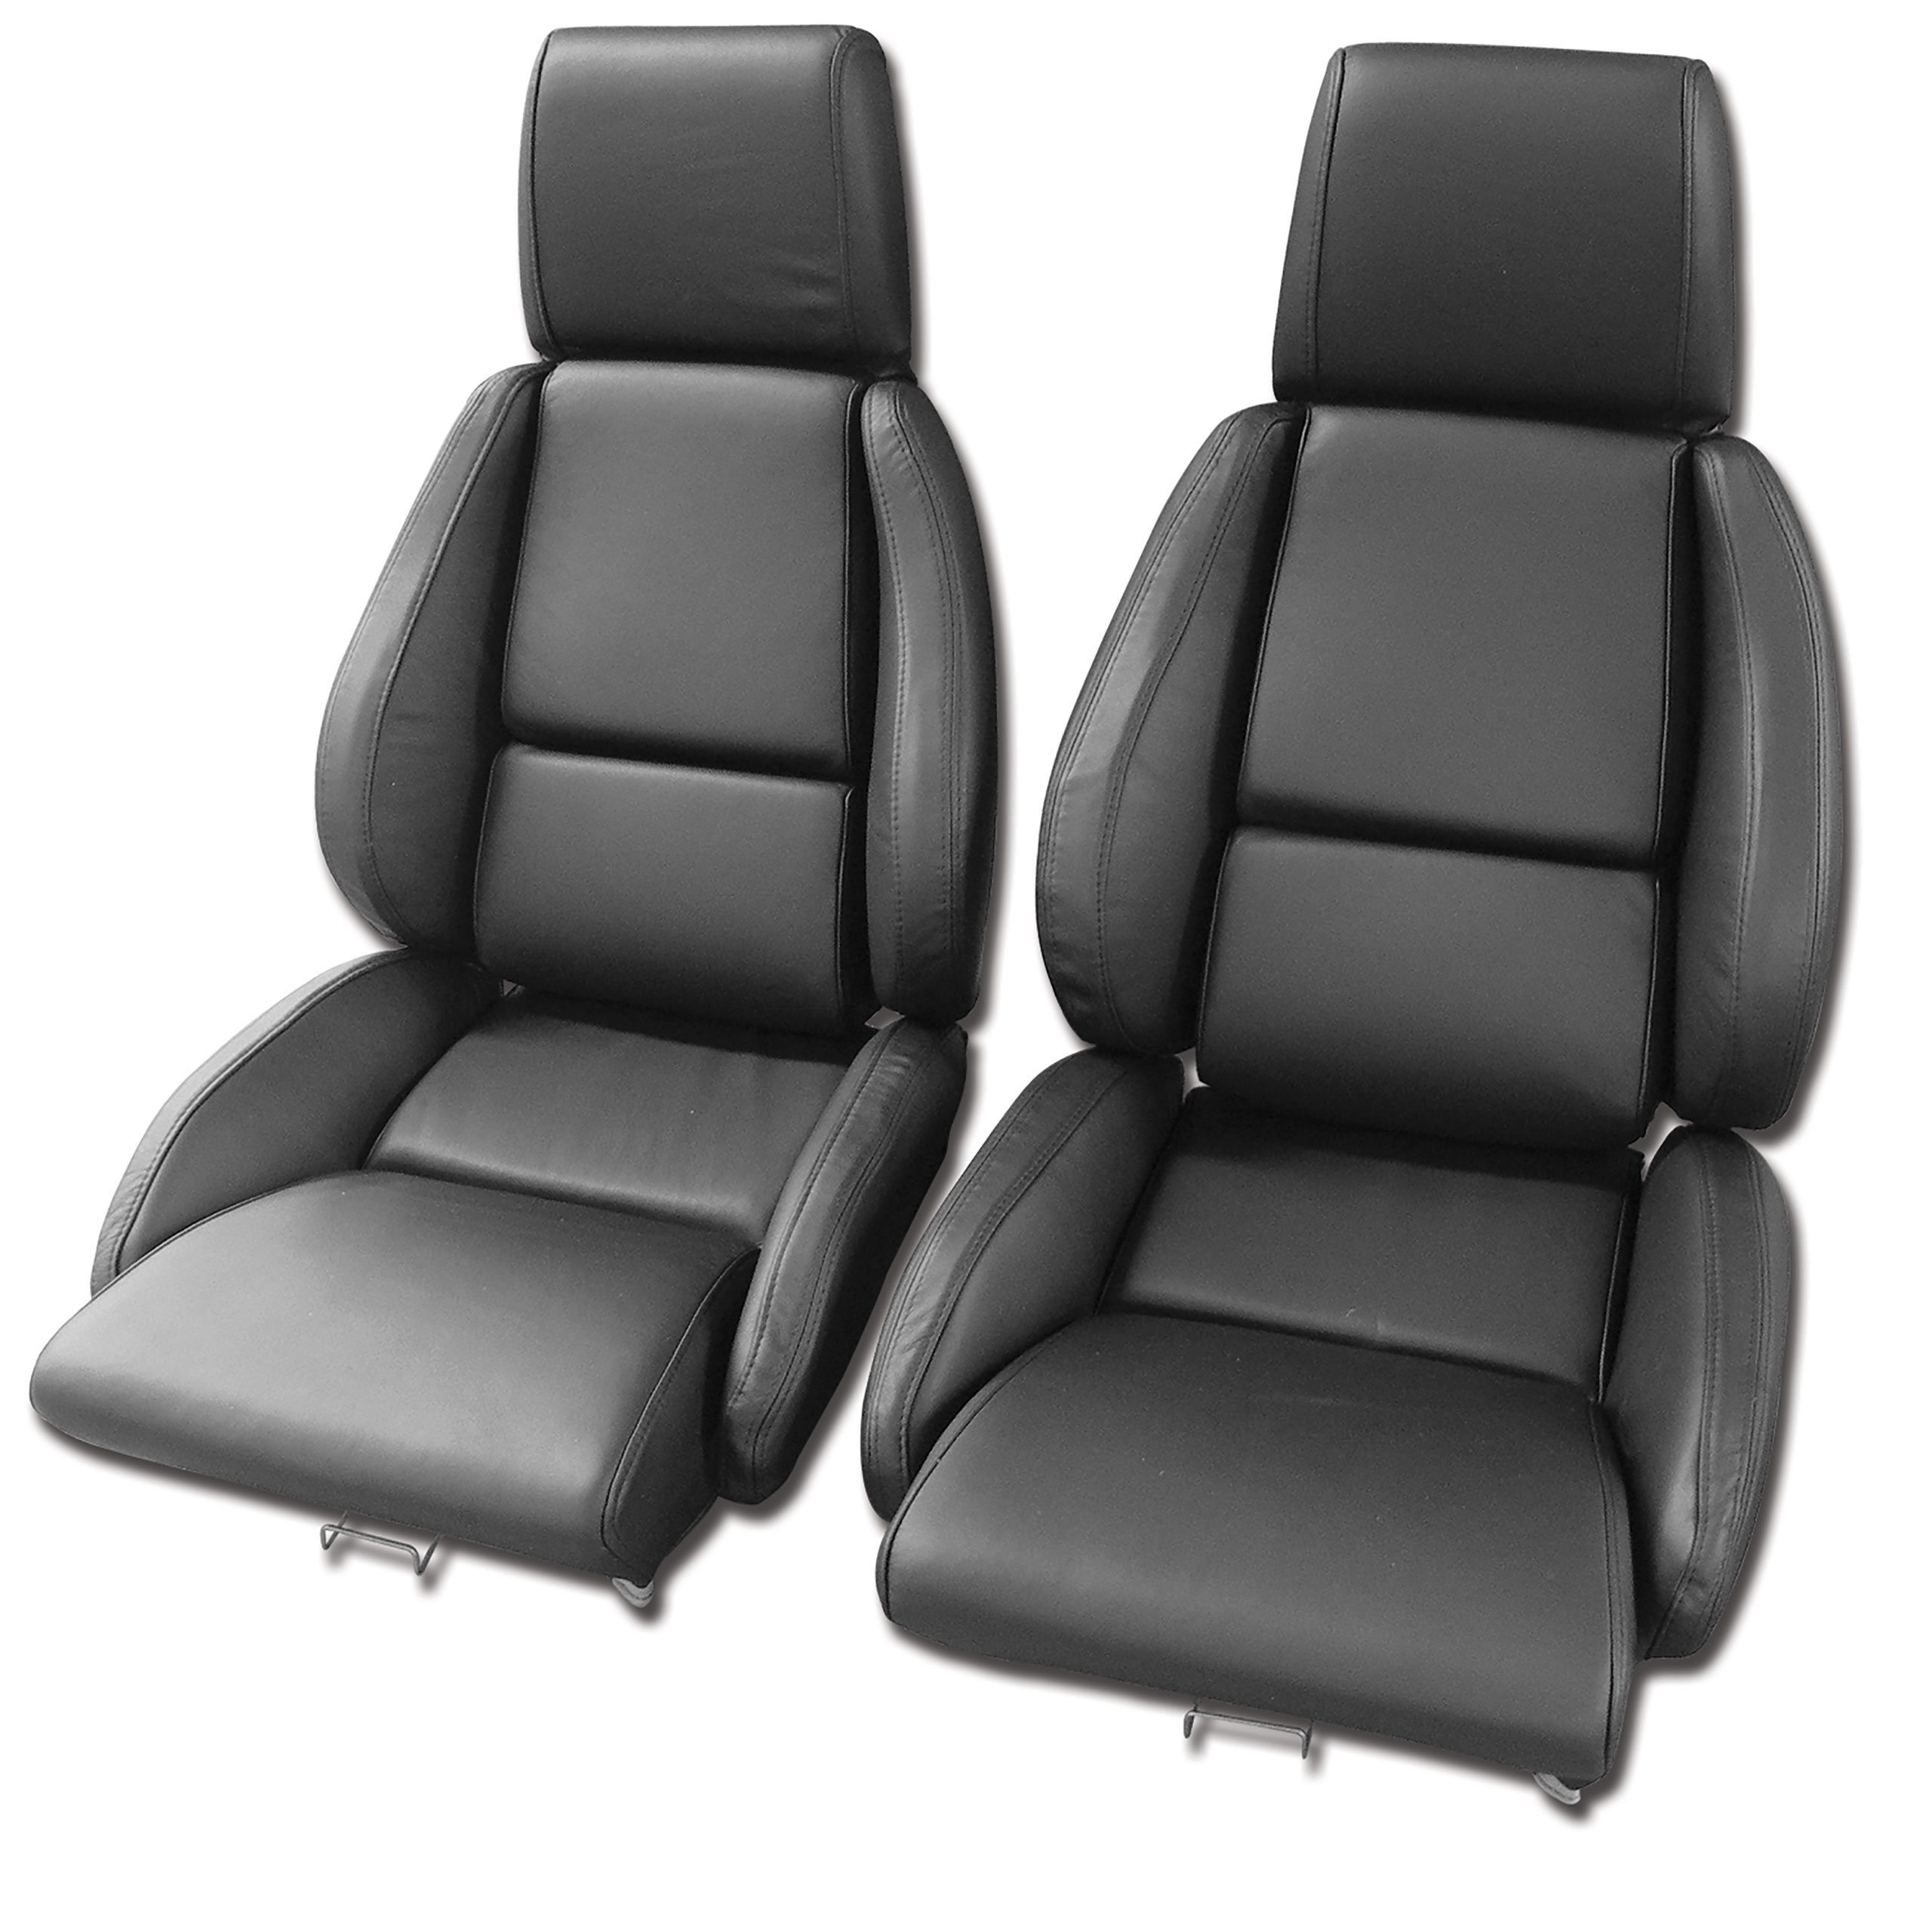 1984-1988 C4 Corvette Mounted Leather Seat Covers Black Standard No-Perforations